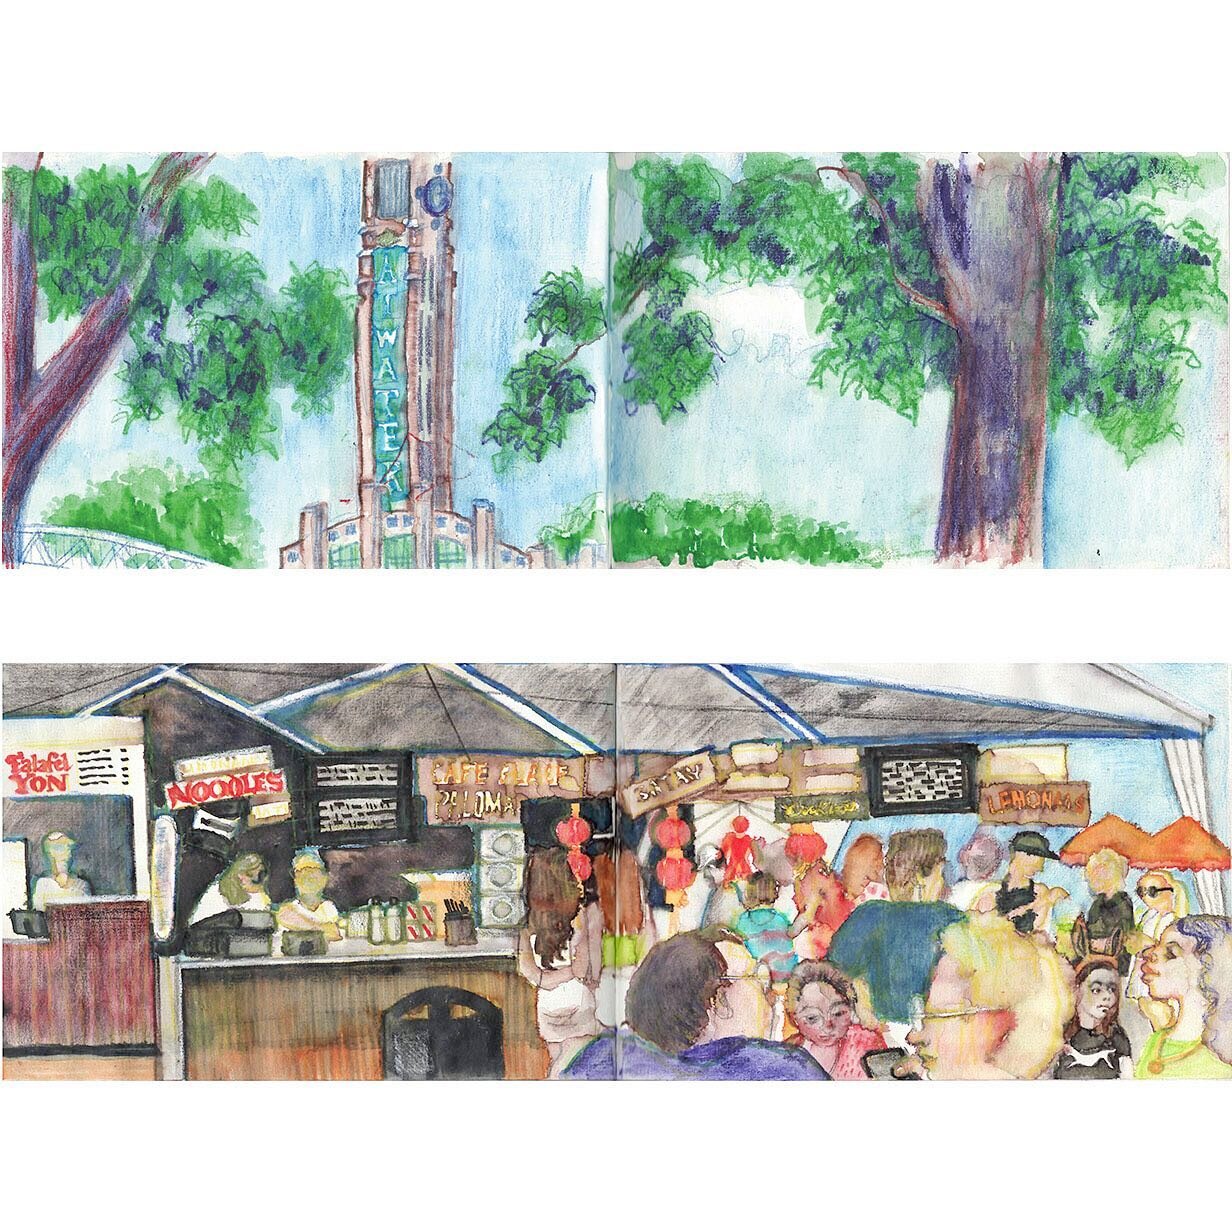 2 double-page spreads from my sketchbook: Atwater Market.

#atwatermarket #foodmarket #foodiemarket #gourmetfoodmarket #sketchbook #drawnfromlife #peopleatleisure #sketchbookspreads #dps